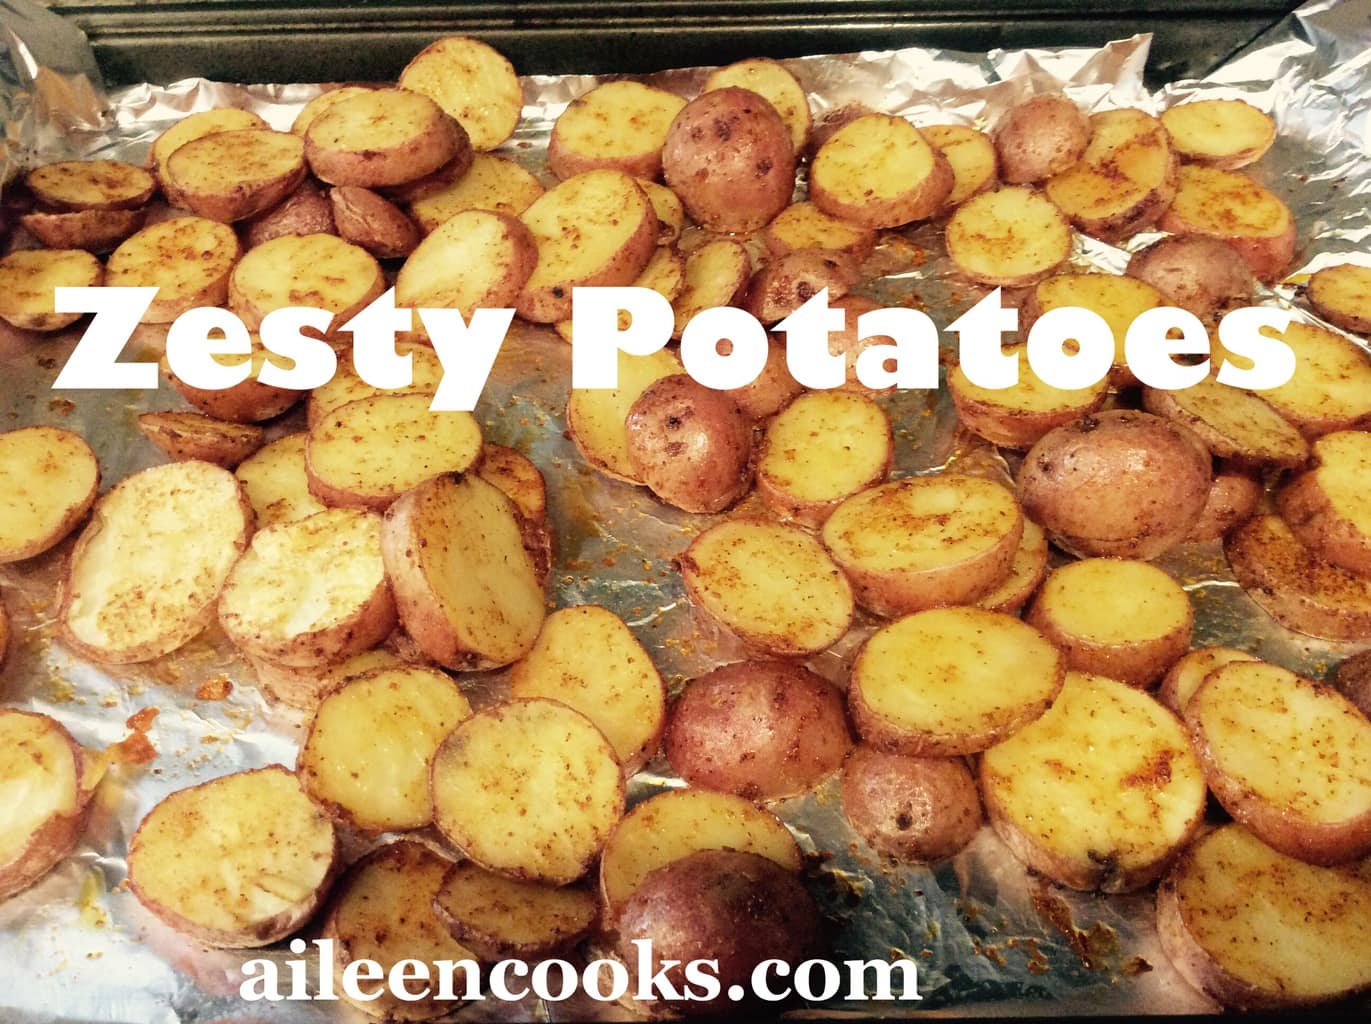 Roasted red potatoes recipe all golden brown on a foil-lined cookie sheet.